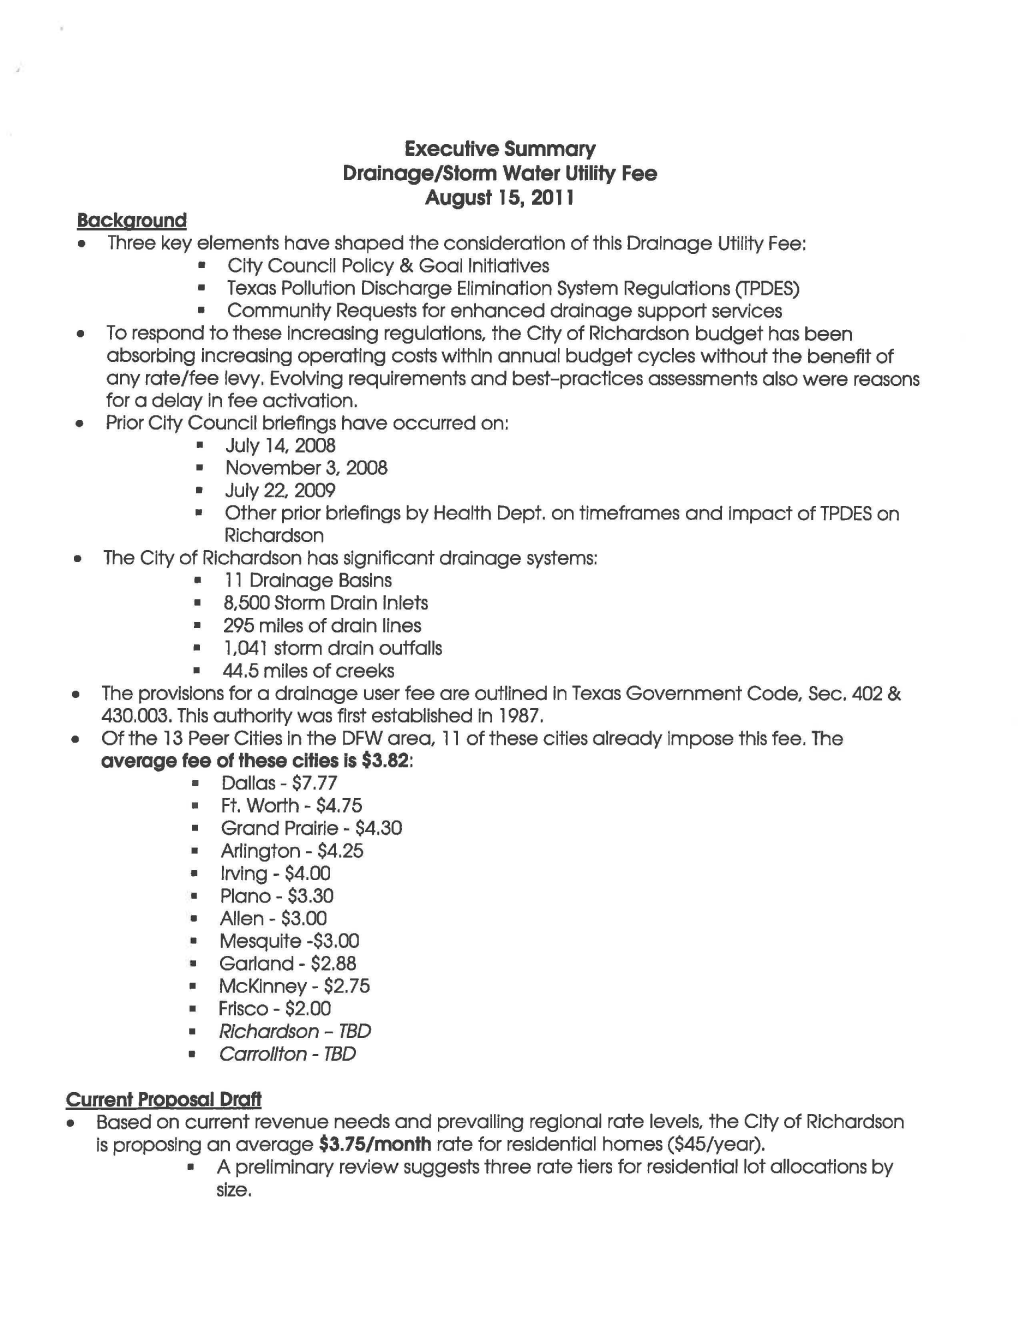 Executive Summary Drainage/Storm Water Utility Fee August 15, 2011